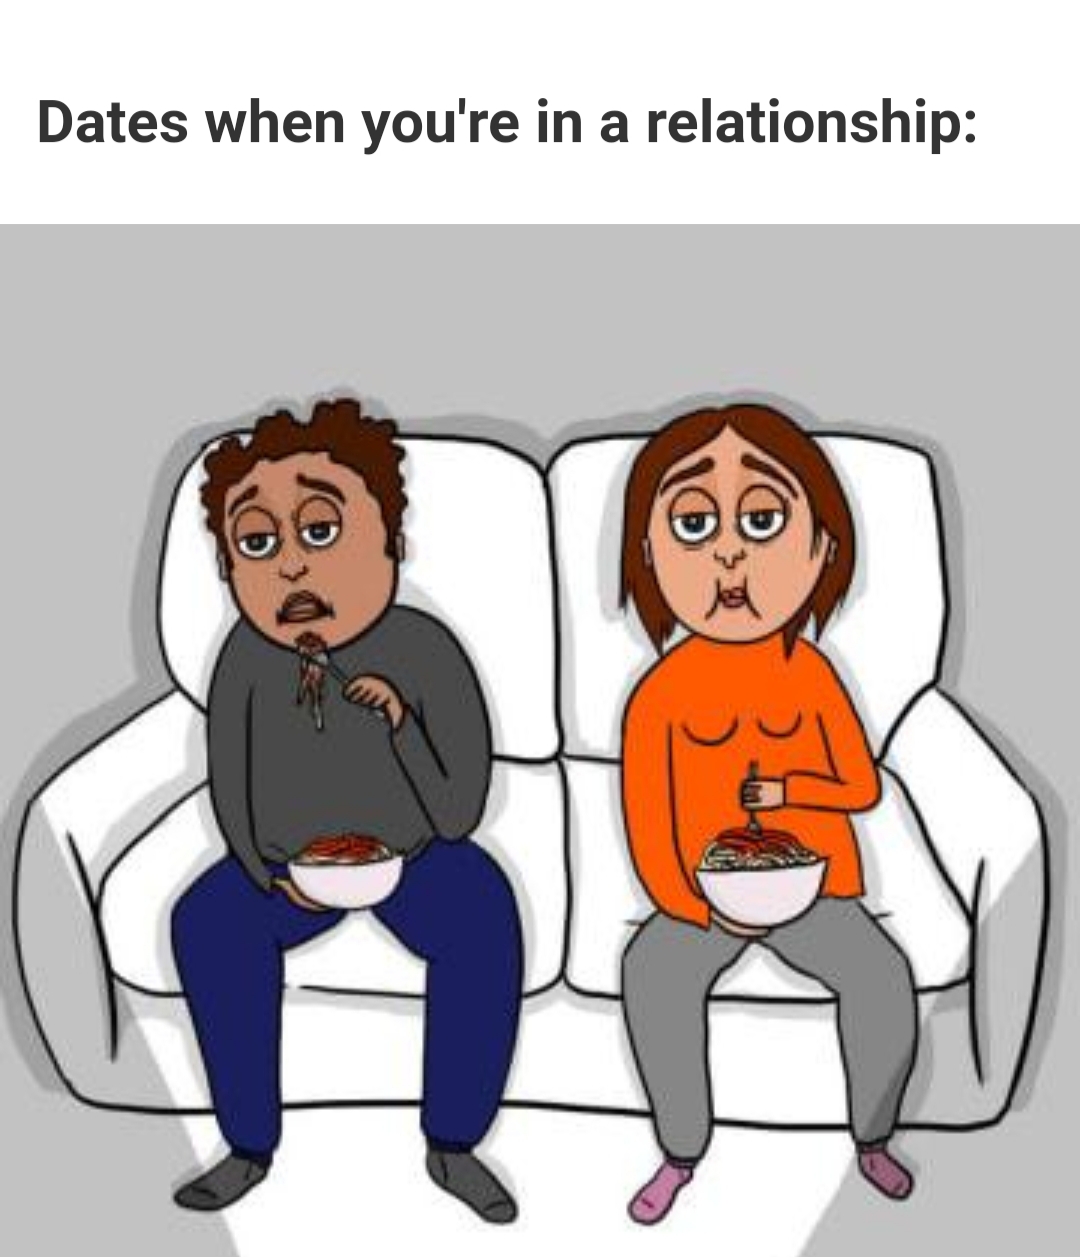 people - Dates when you're in a relationship